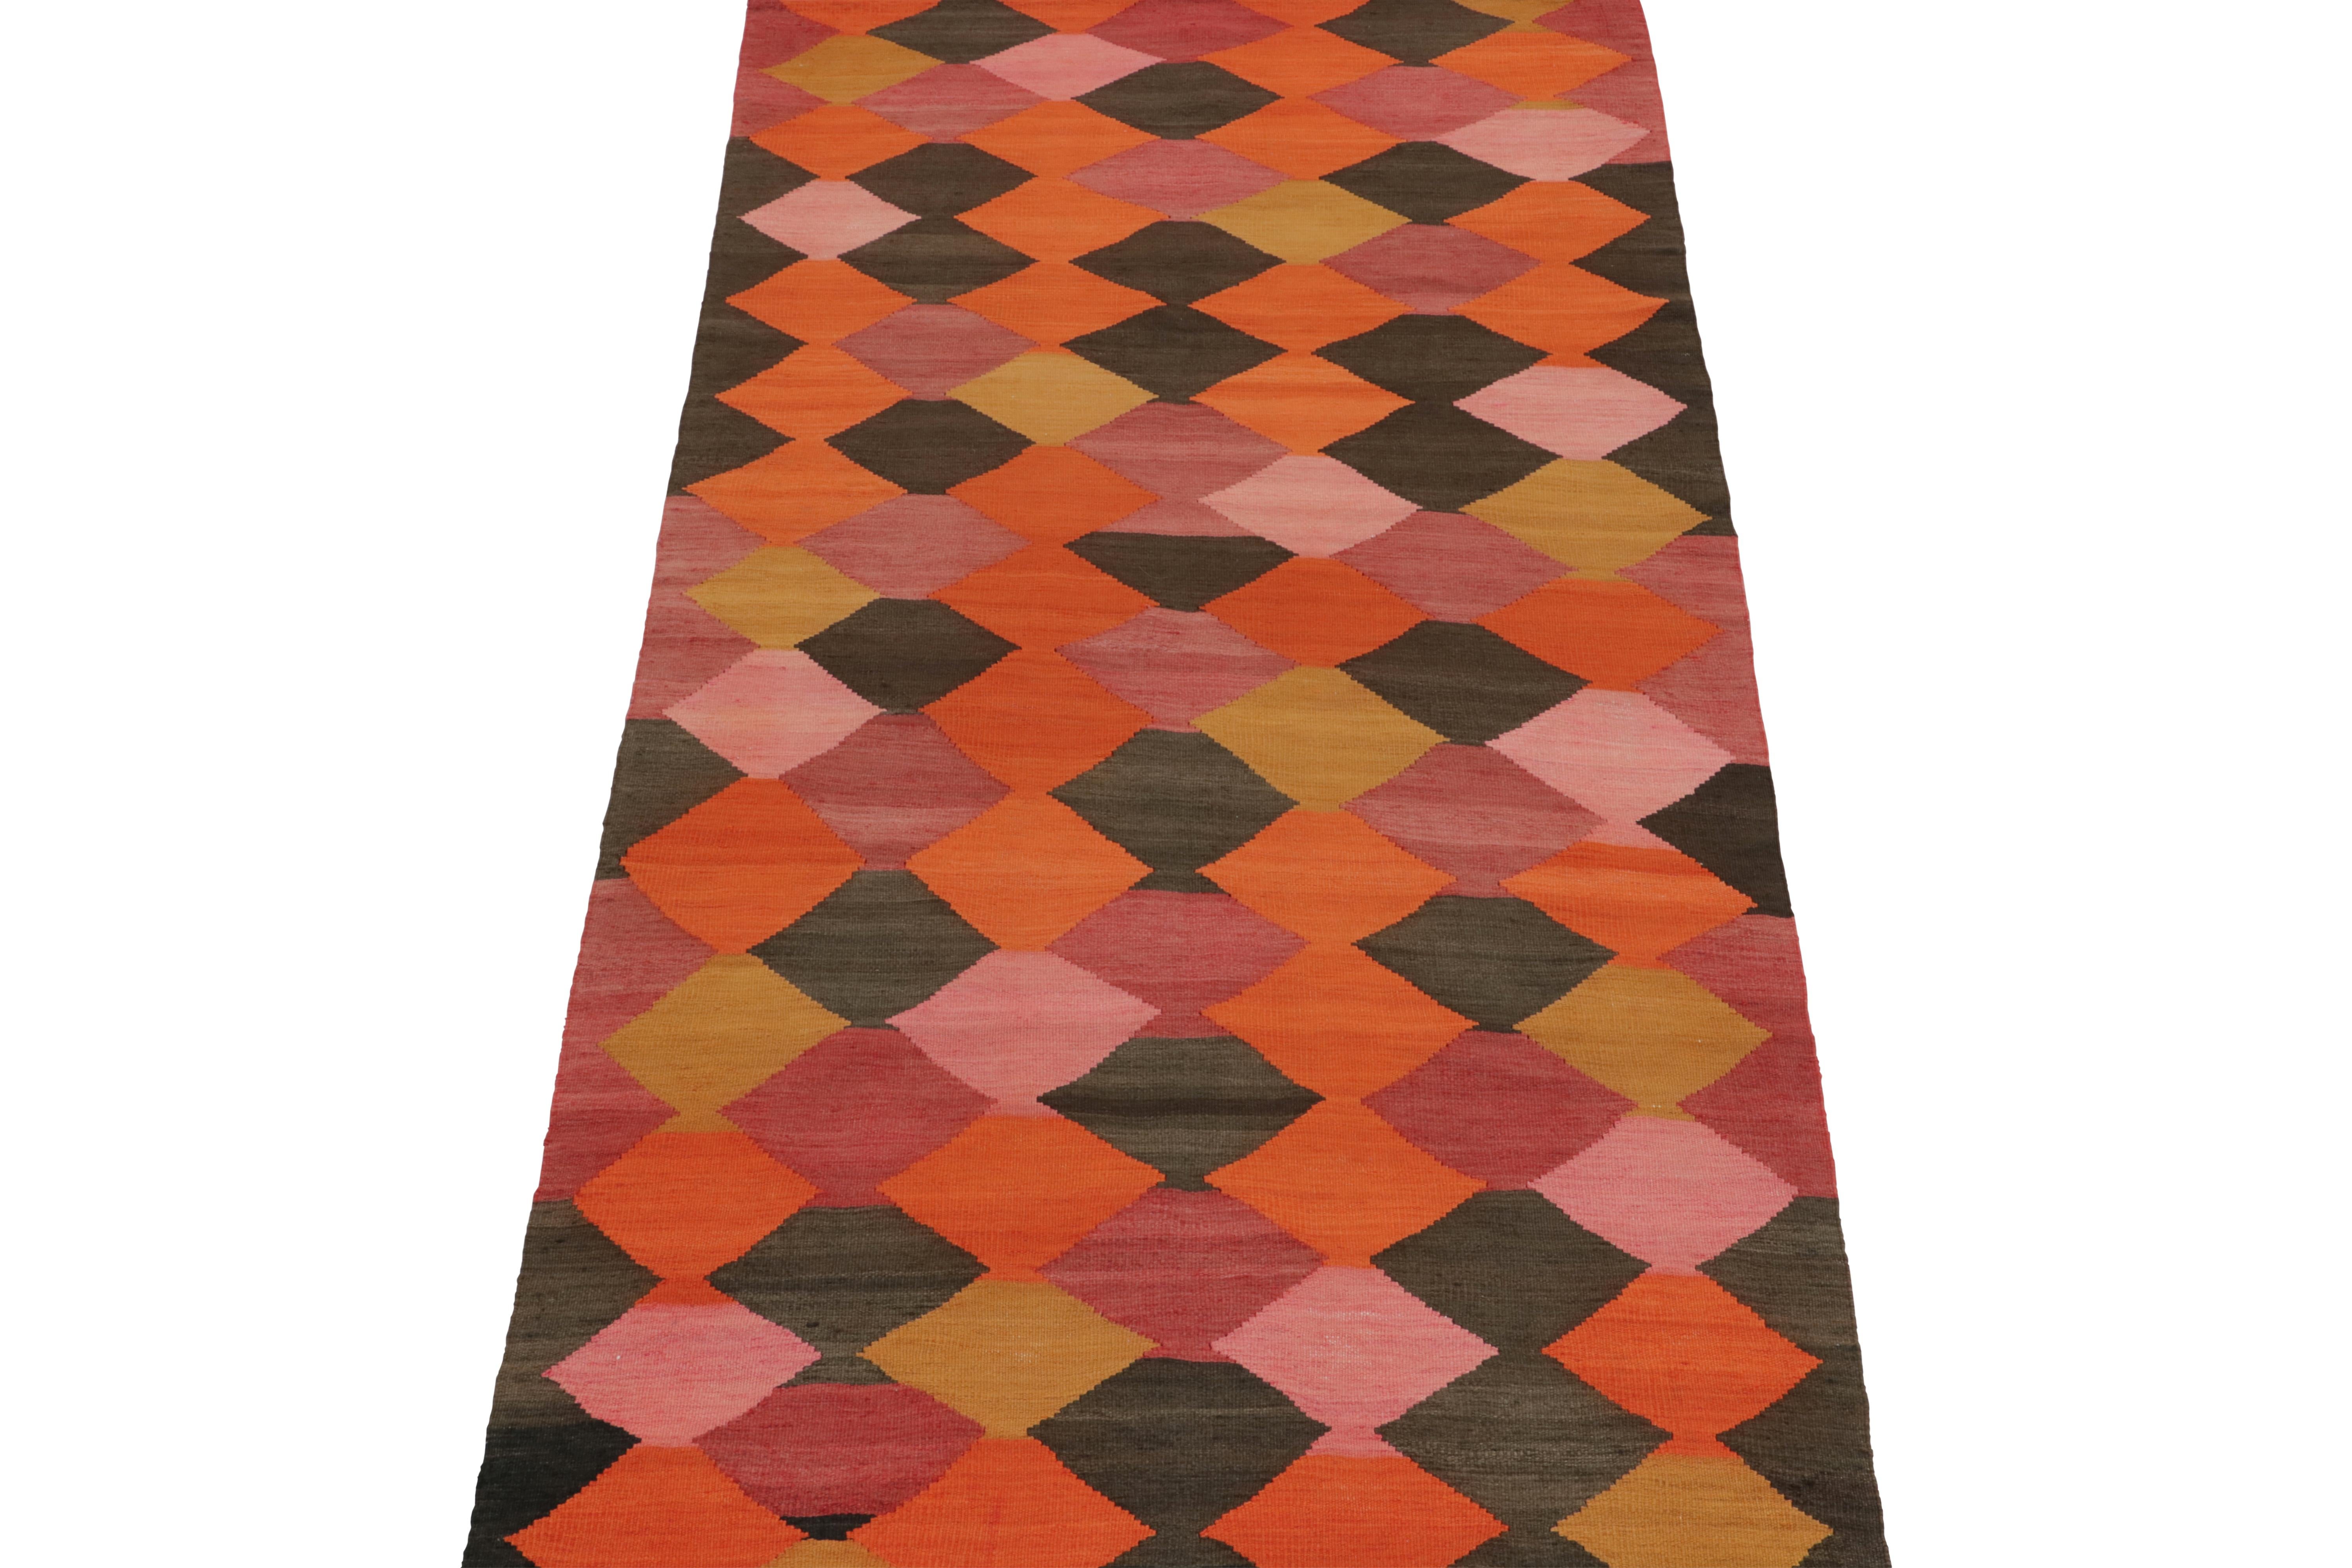 This vintage 4x9 Persian Kilim hails from the mountainous Karadagh regions of Iran, and enjoys a vibrant polychromatic design. Handwoven in wool, it originates circa 1950-1960.

On the Design: 

This runner enjoys an all over geometric pattern in